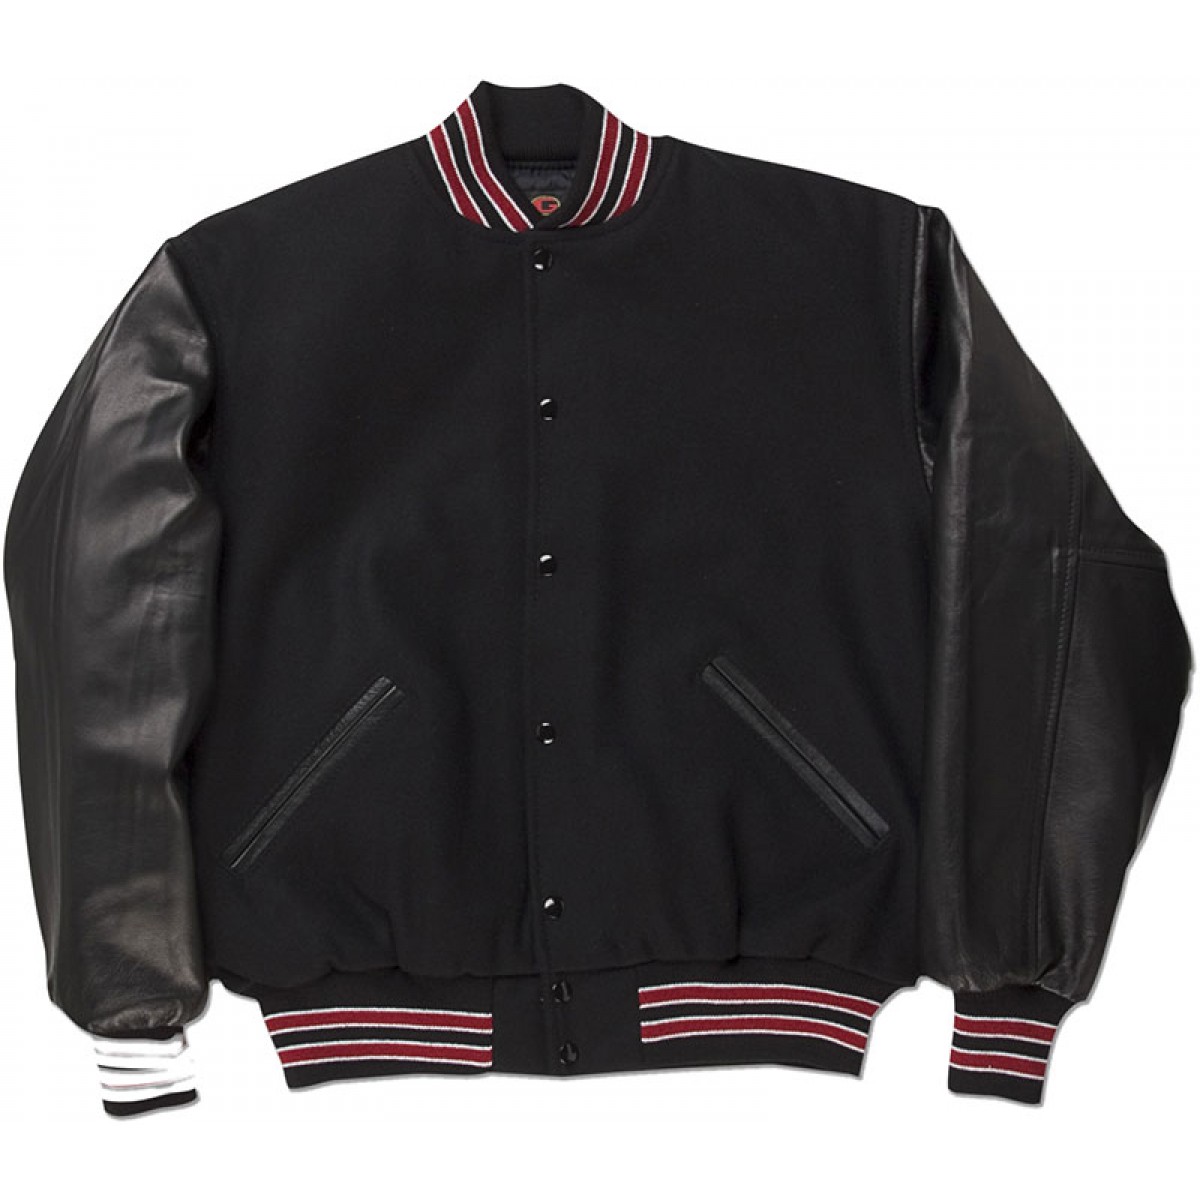 Black And Red Letterman Jacket